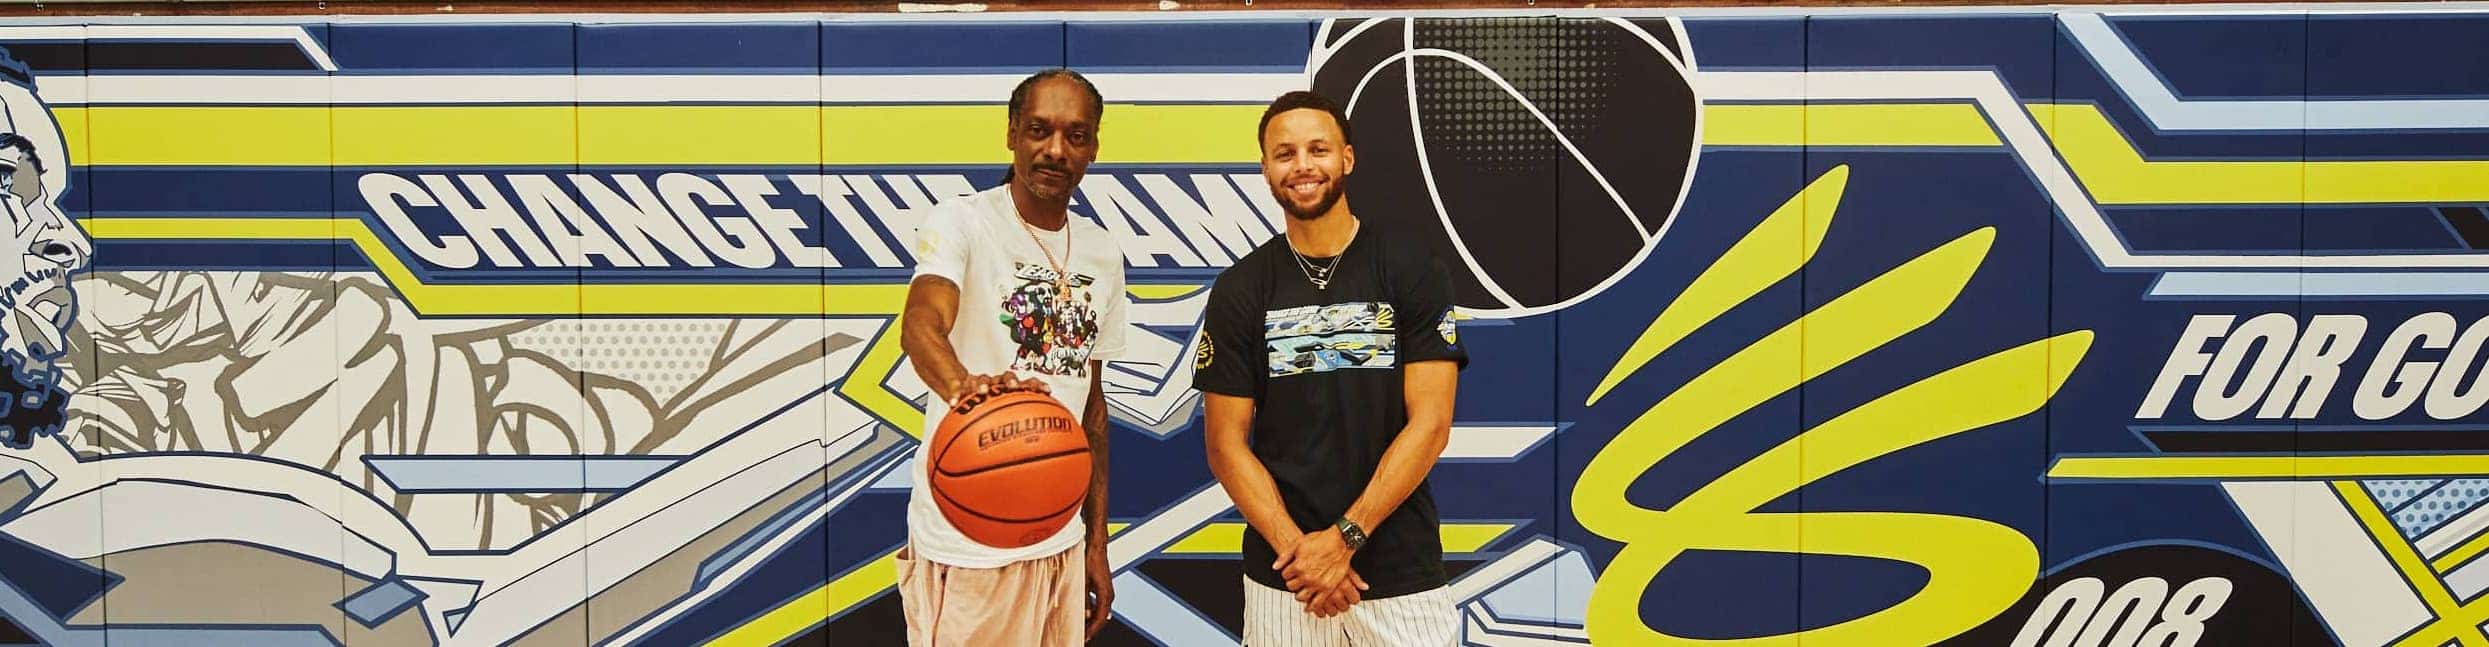 Stephen curry and snoop dogg team up for youth hoops